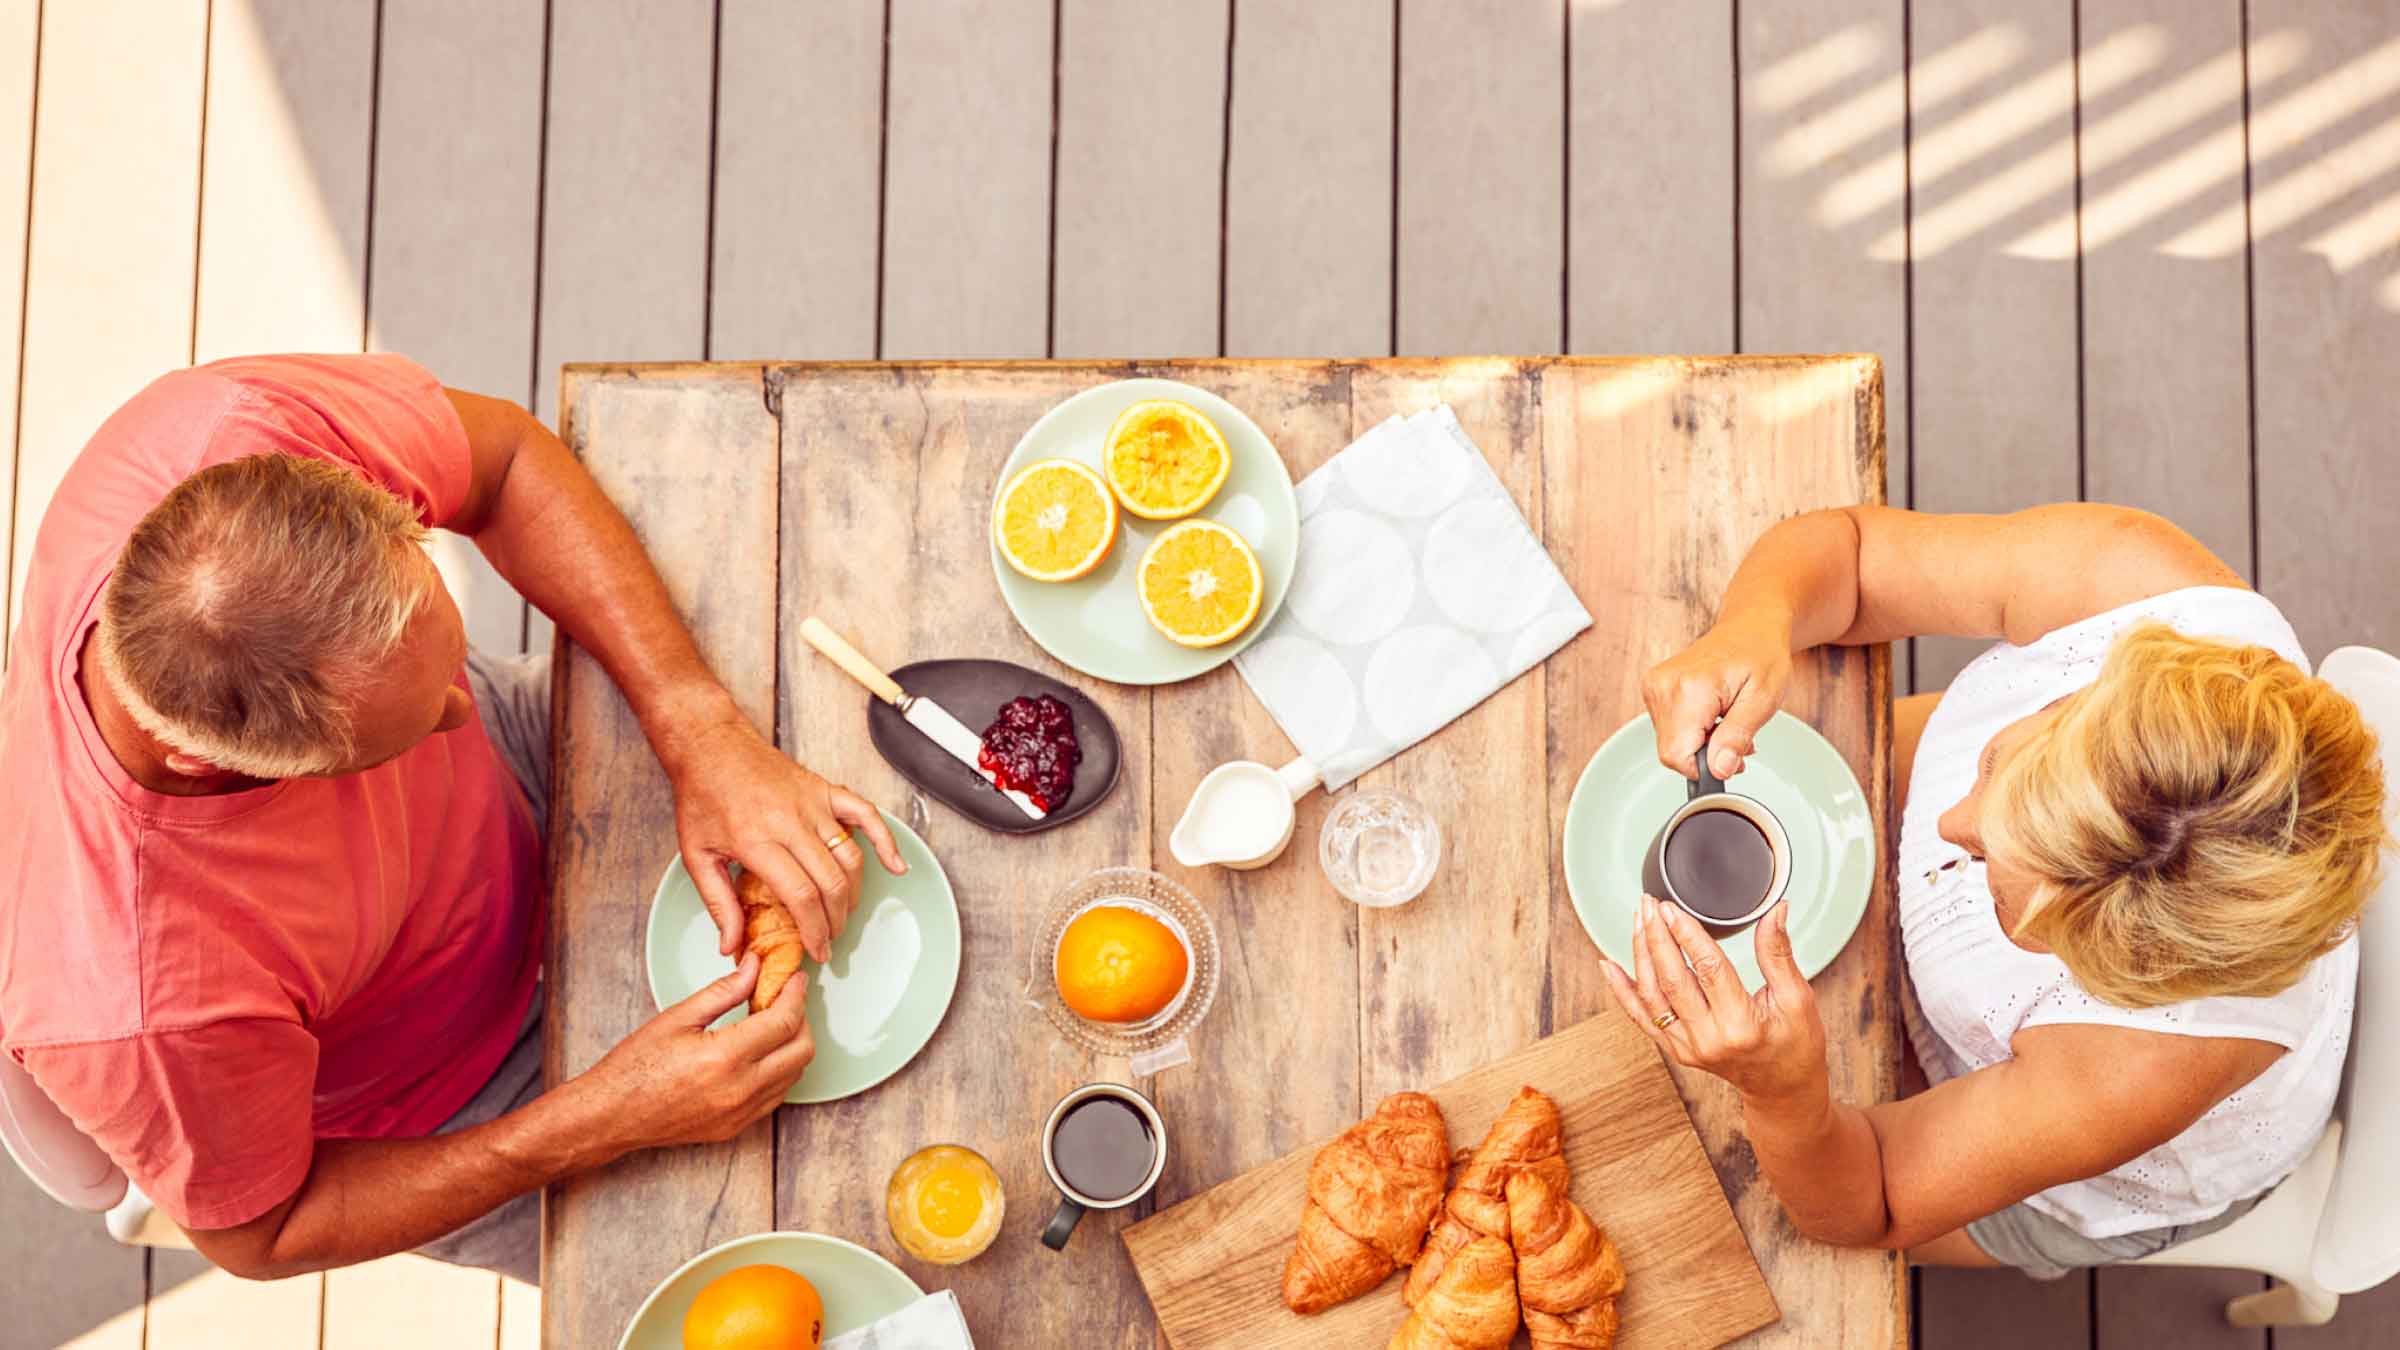 Ariel view of a couple sitting outside on their wooden decking, feasting on freshly cut oranges and croissants.